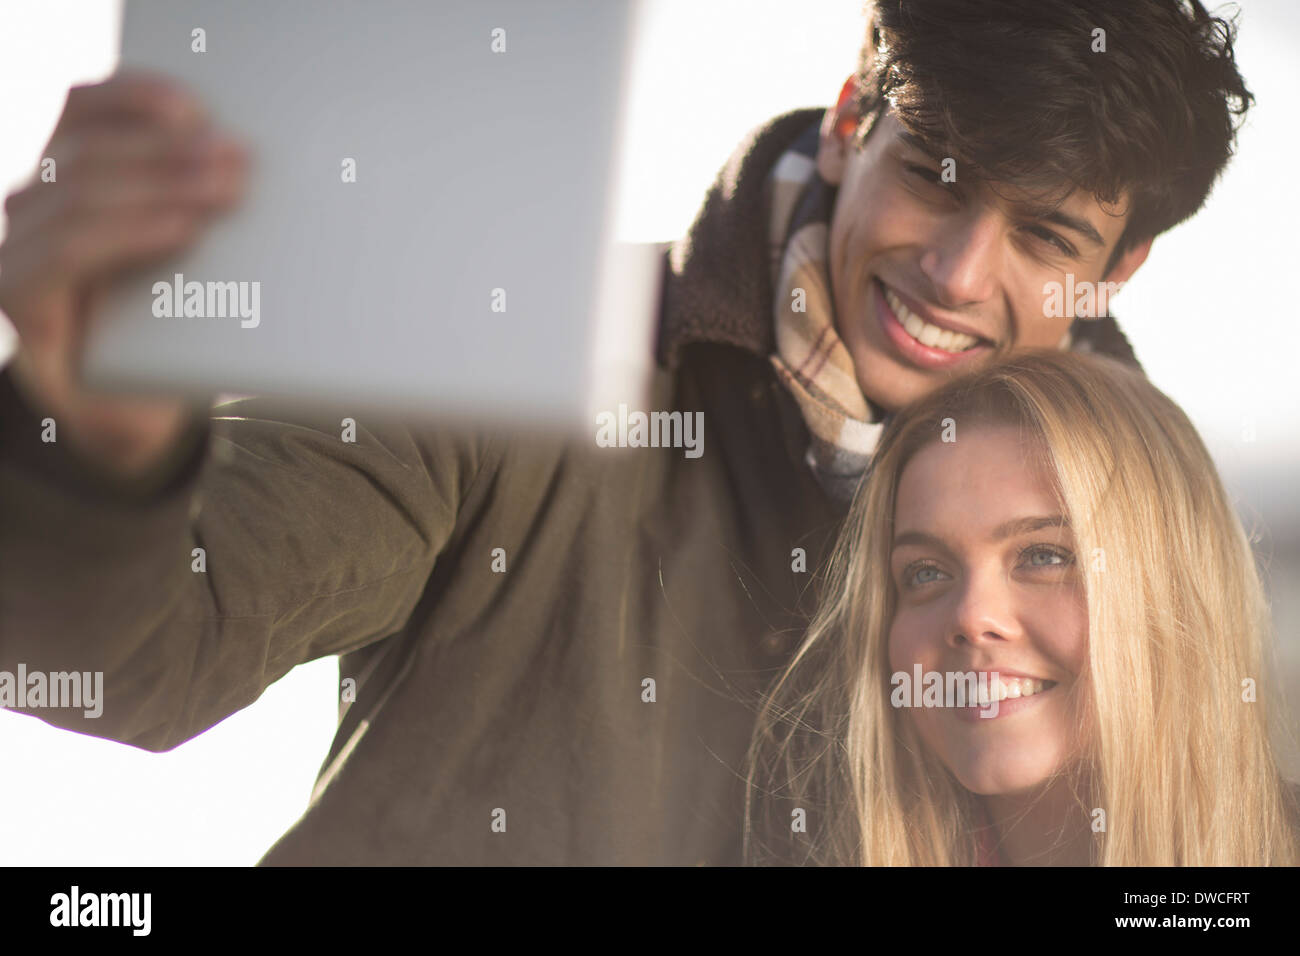 A young couple take self portrait photograph using digital tablet Stock Photo